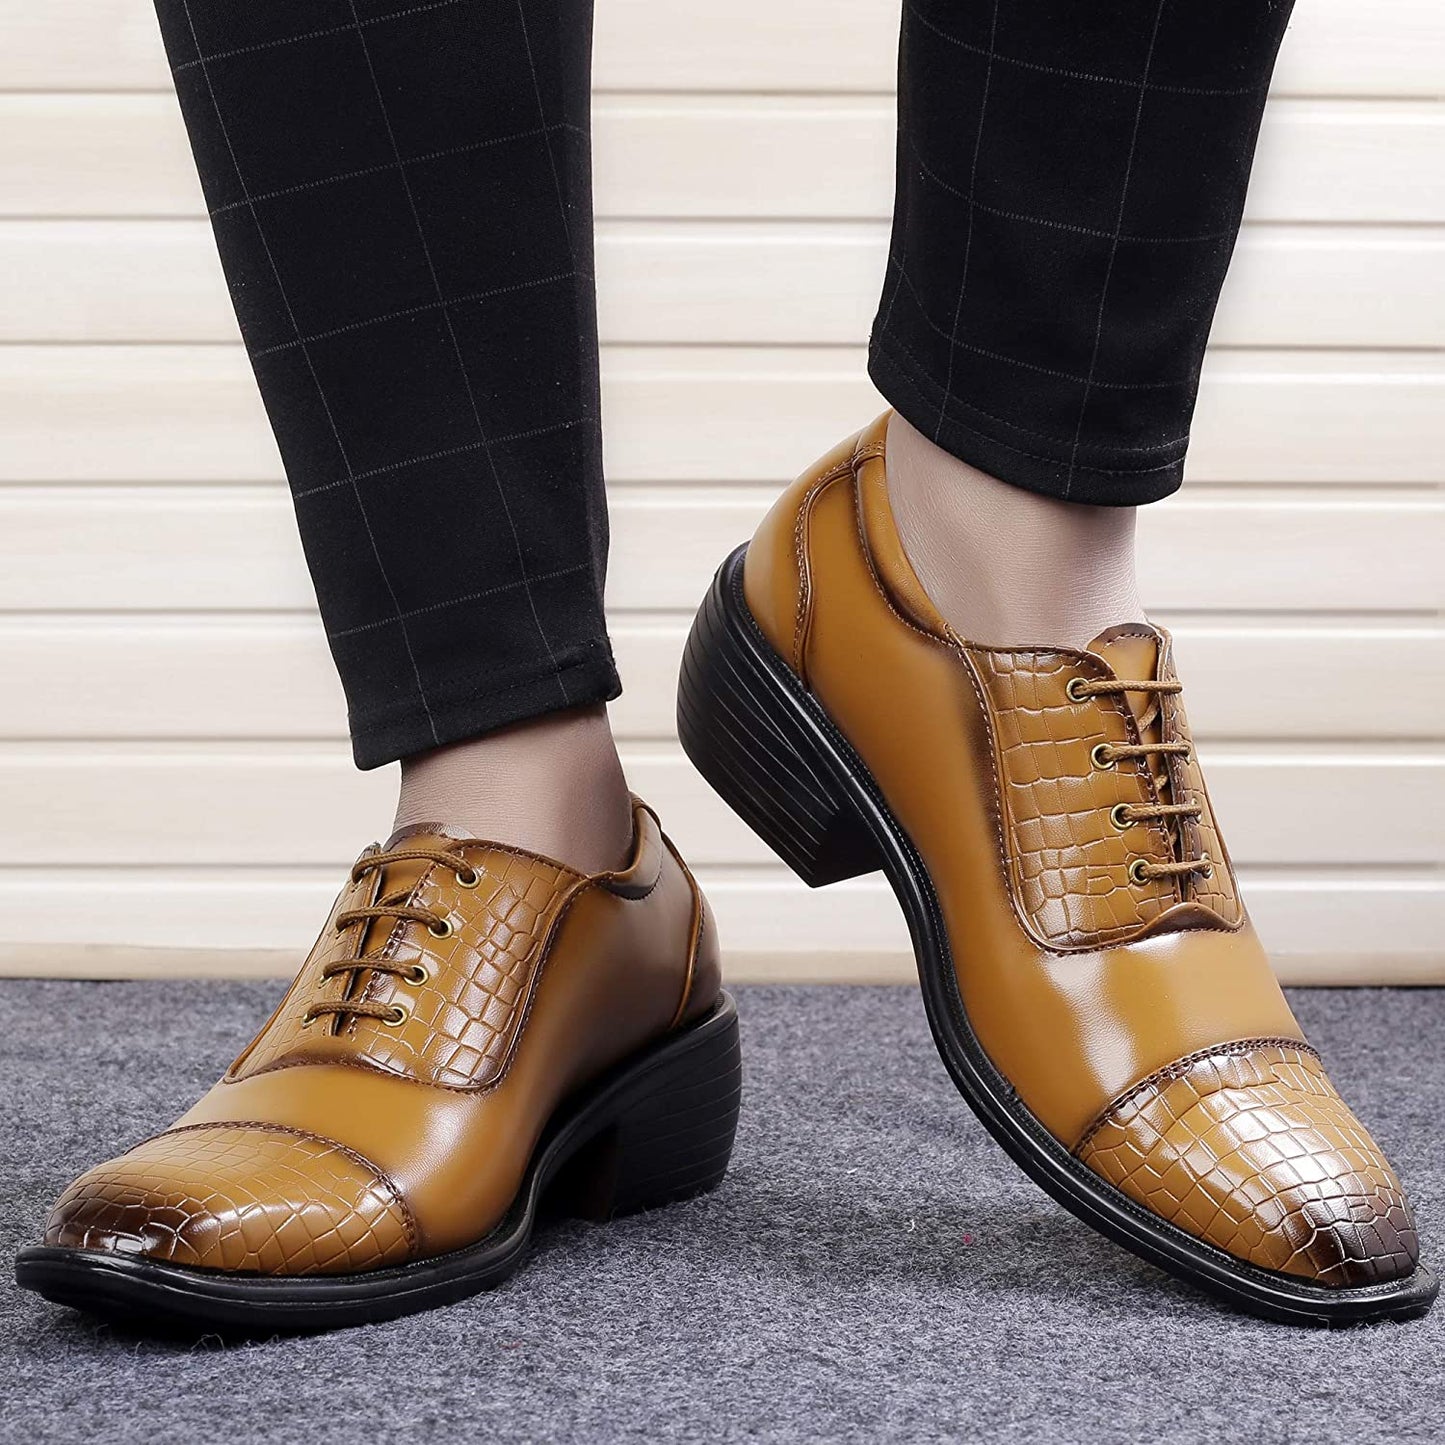 Stylish Tan Formal and Casual Wear Lace-Up Shoes With Height Increasing Heel-JonasParamount